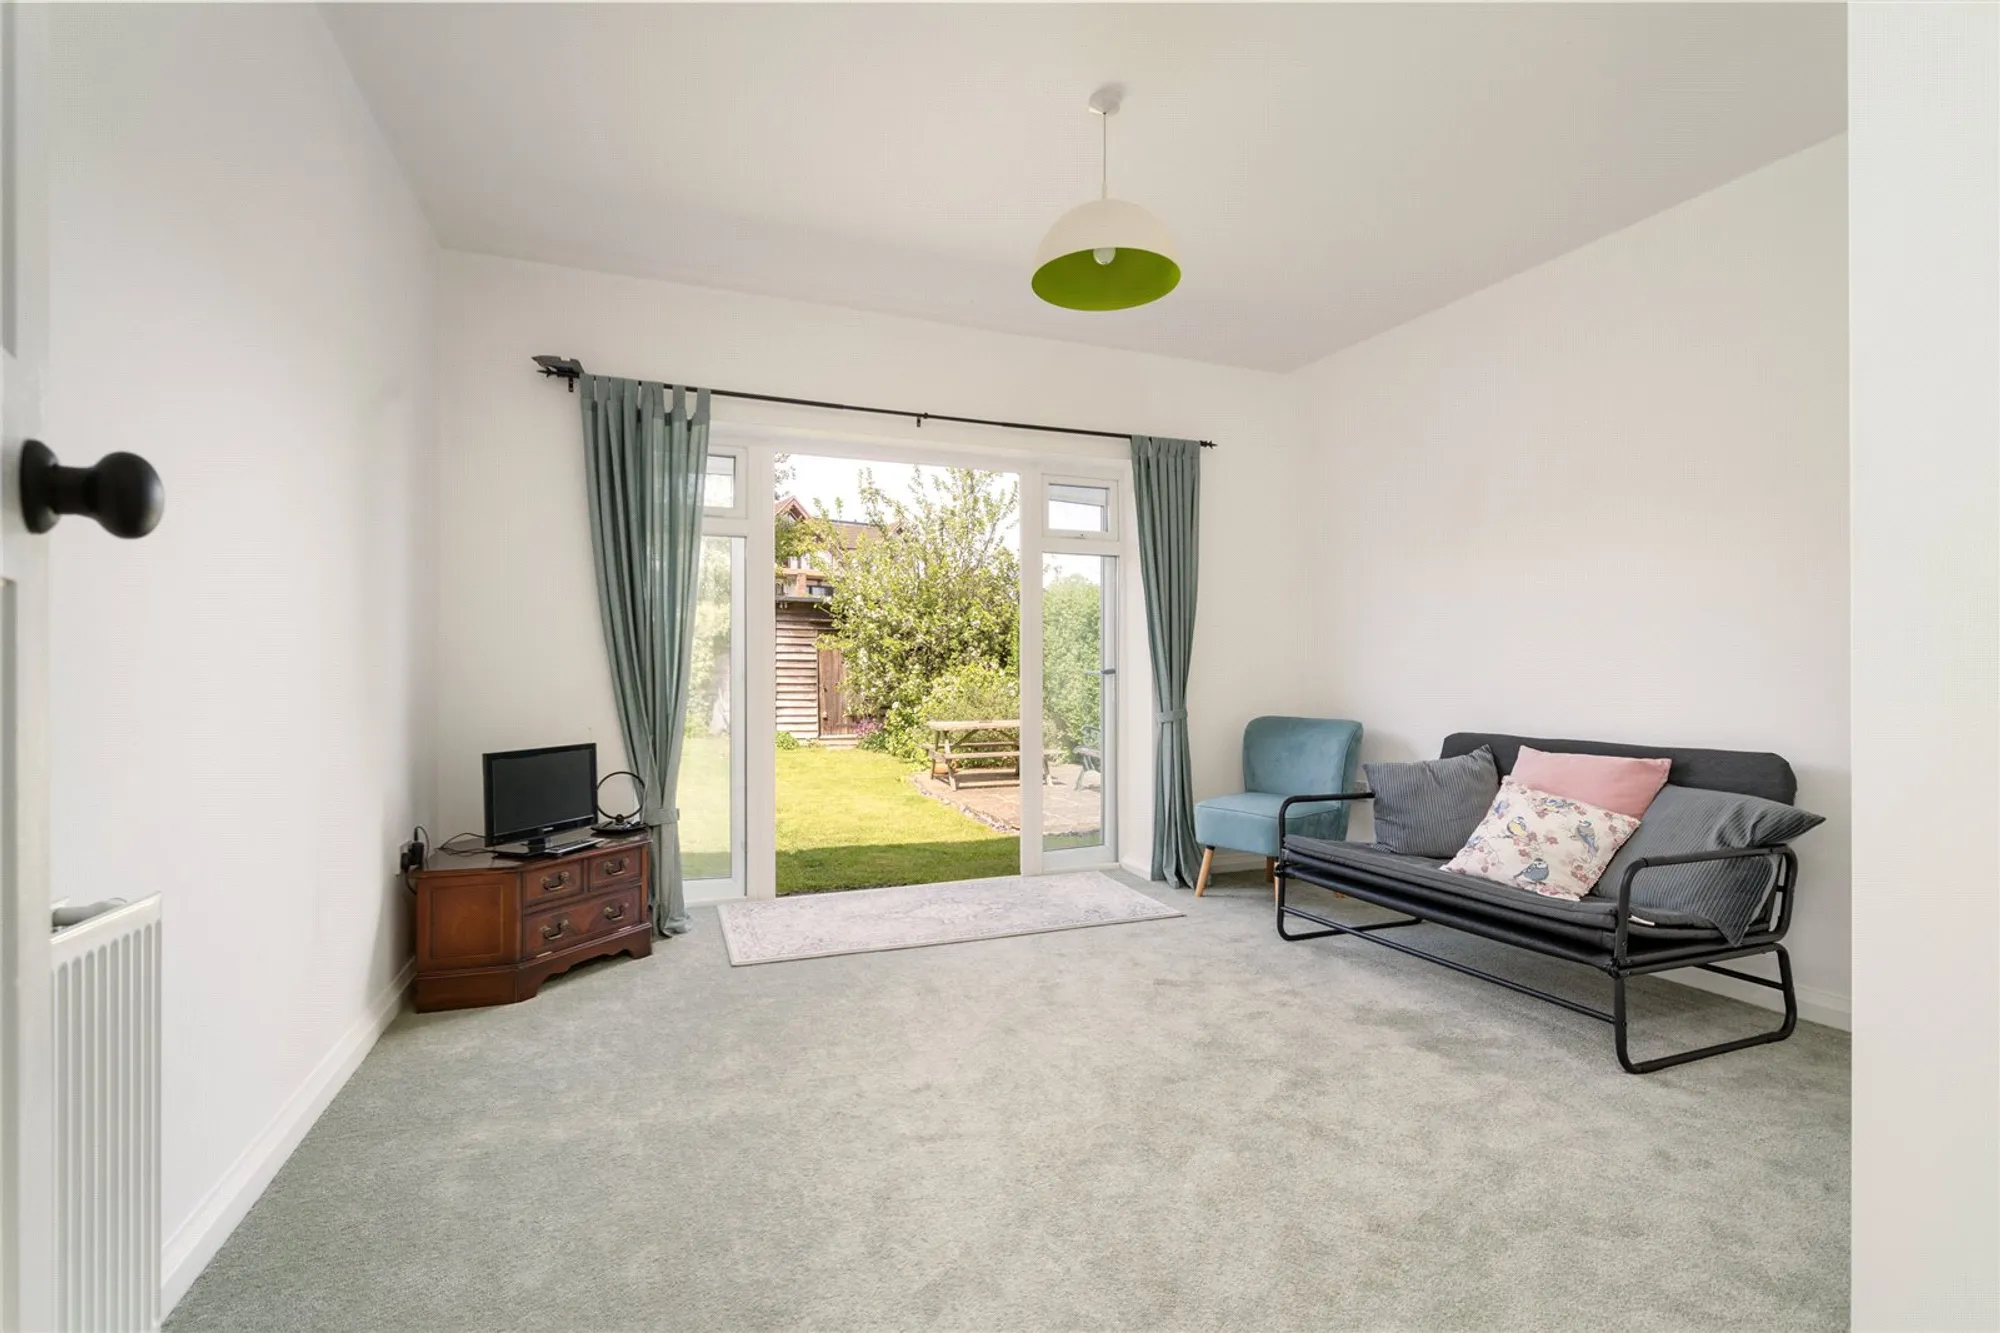 4 bed semi-detached house for sale in Slines Oak Road, Caterham  - Property Image 9